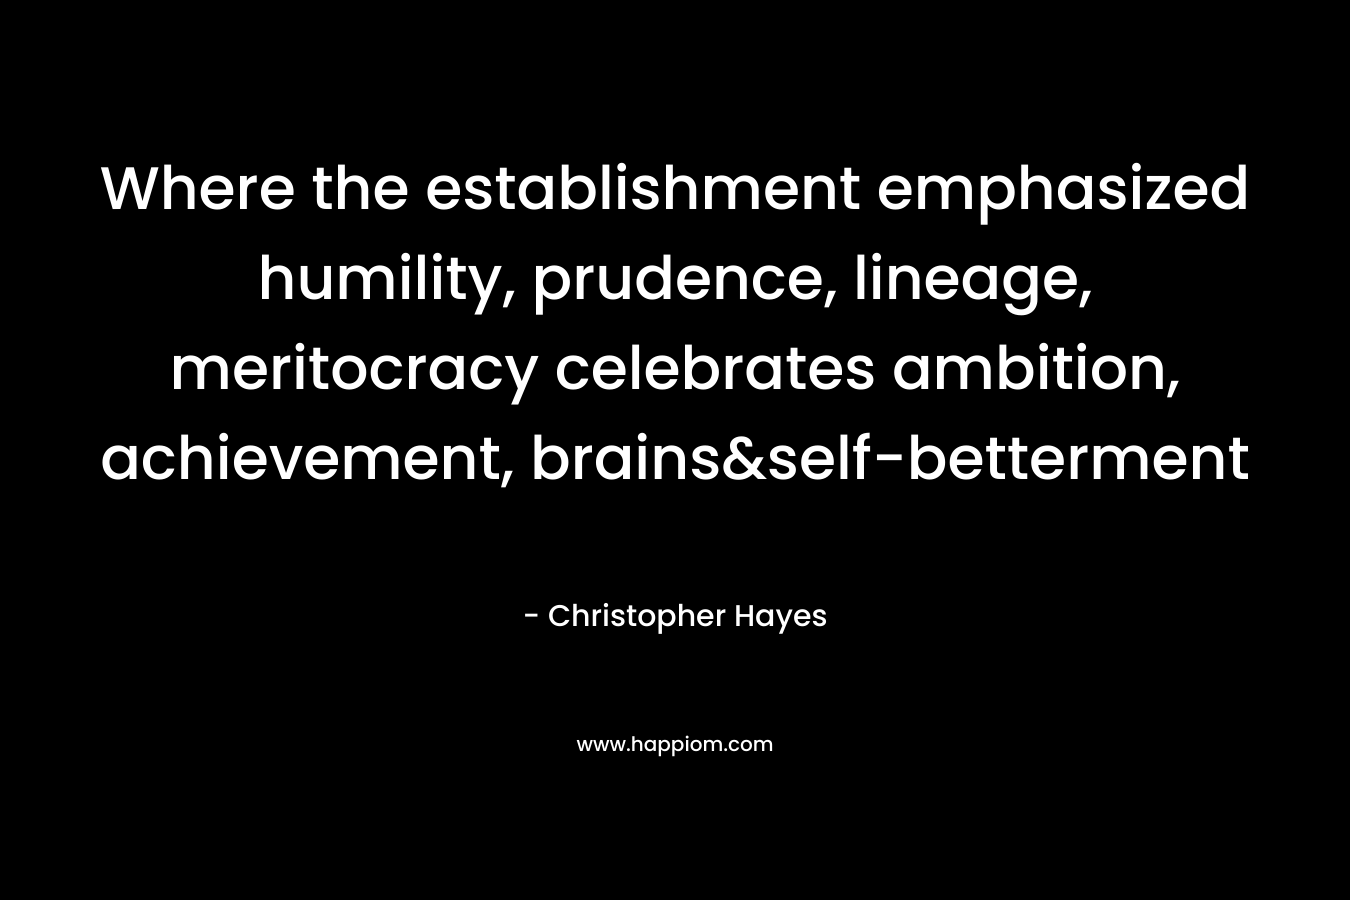 Where the establishment emphasized humility, prudence, lineage, meritocracy celebrates ambition, achievement, brains&self-betterment – Christopher Hayes